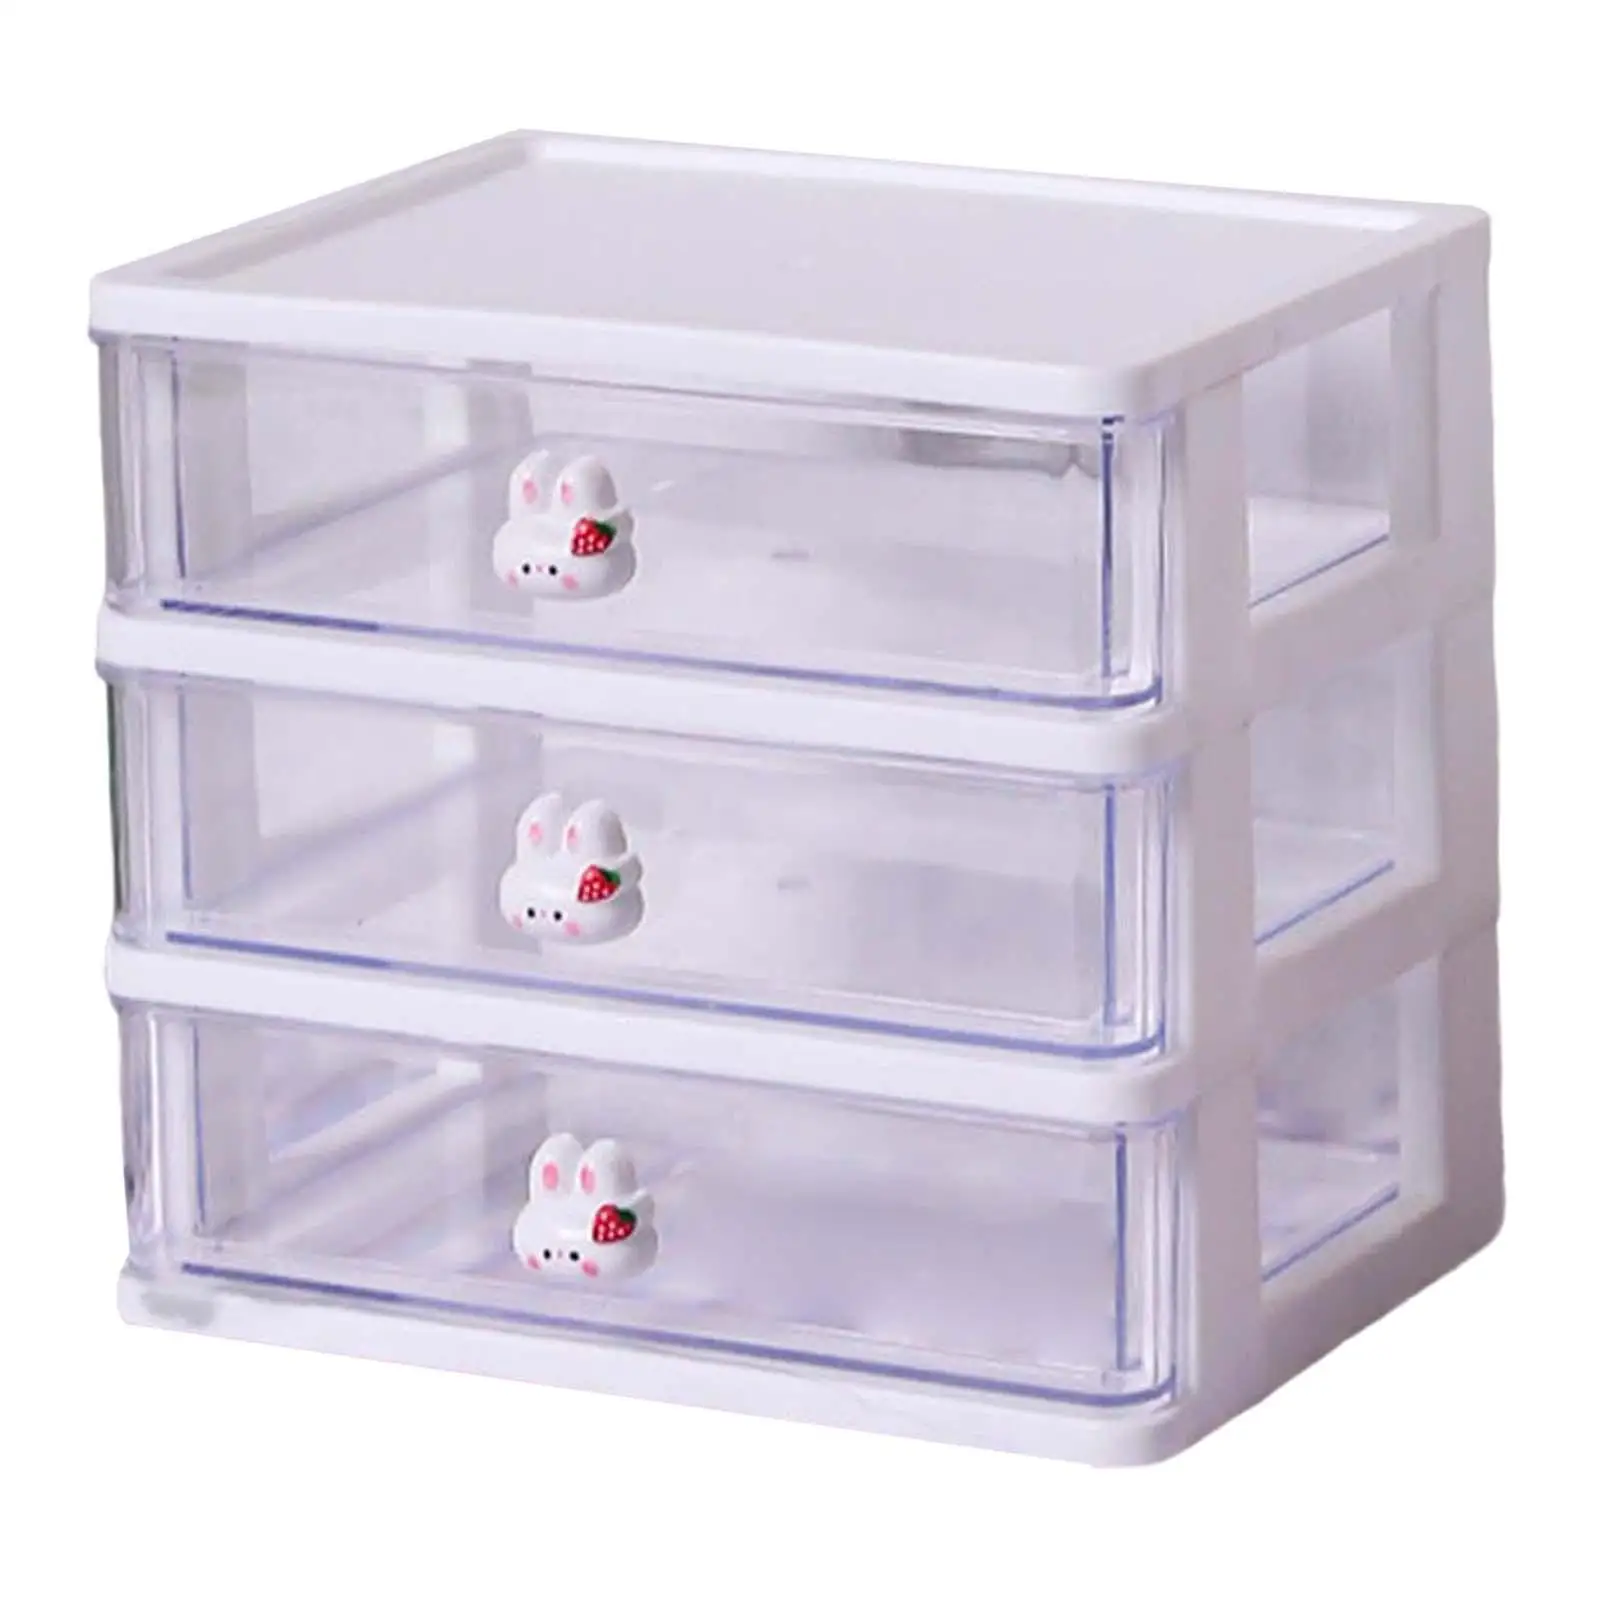 Desk Organizer with Drawer Stackable Office Tabletop Organization Multifunctional Cosmetic Organiser Case for Bathroom Home Dorm